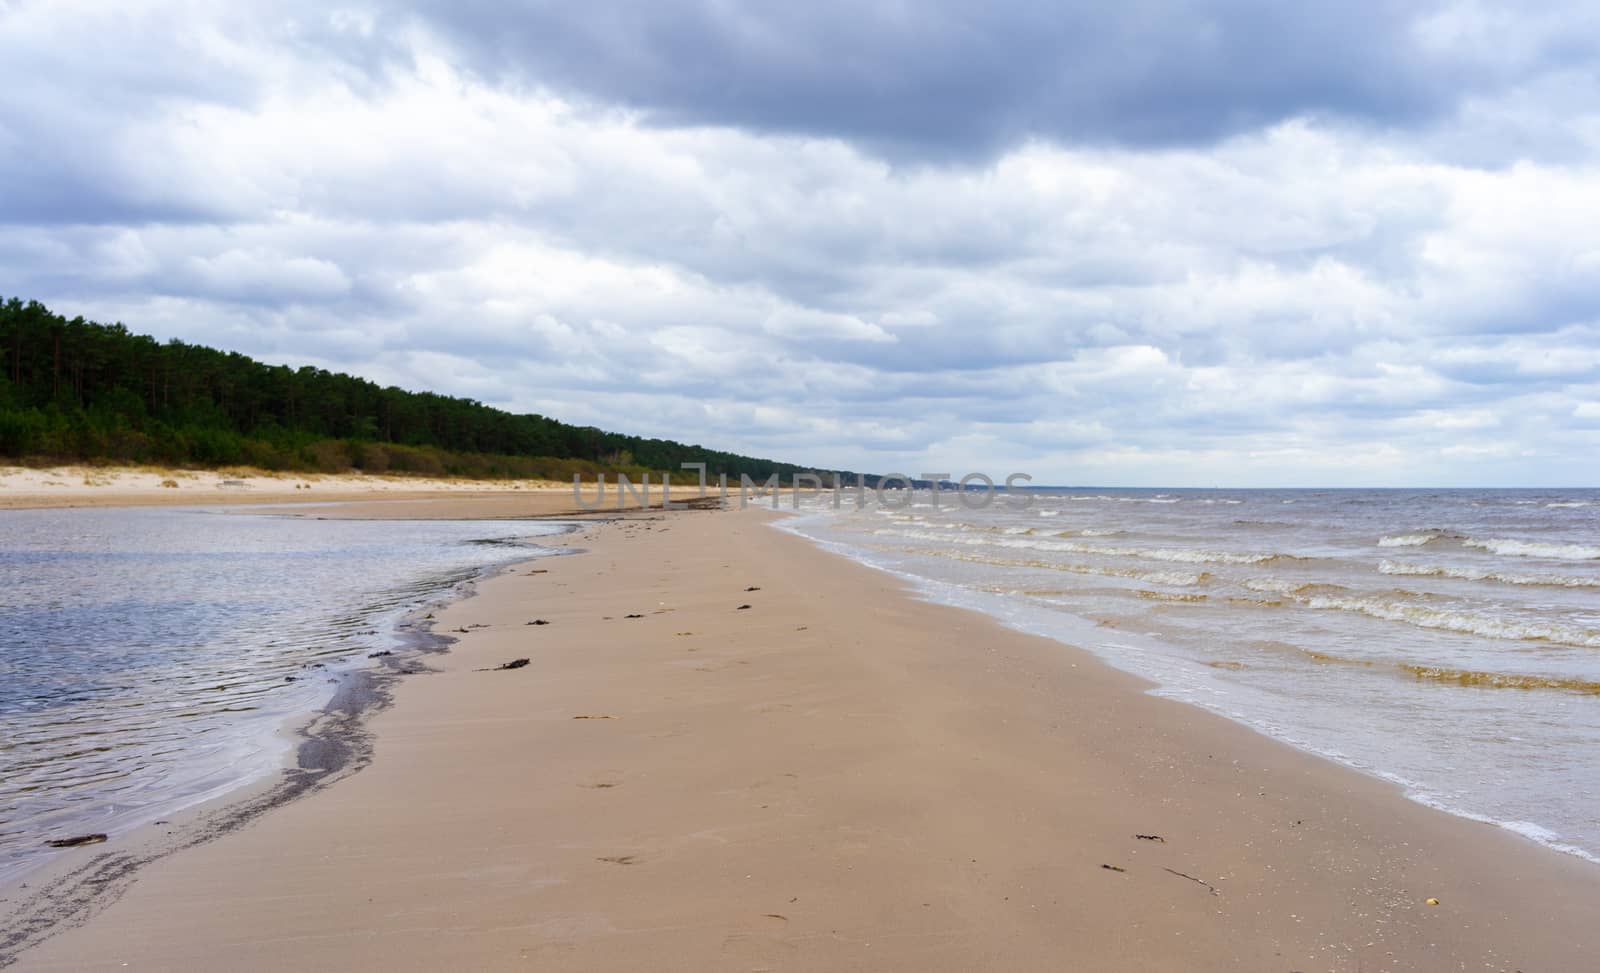 Landscapes of the baltic coast by fifg